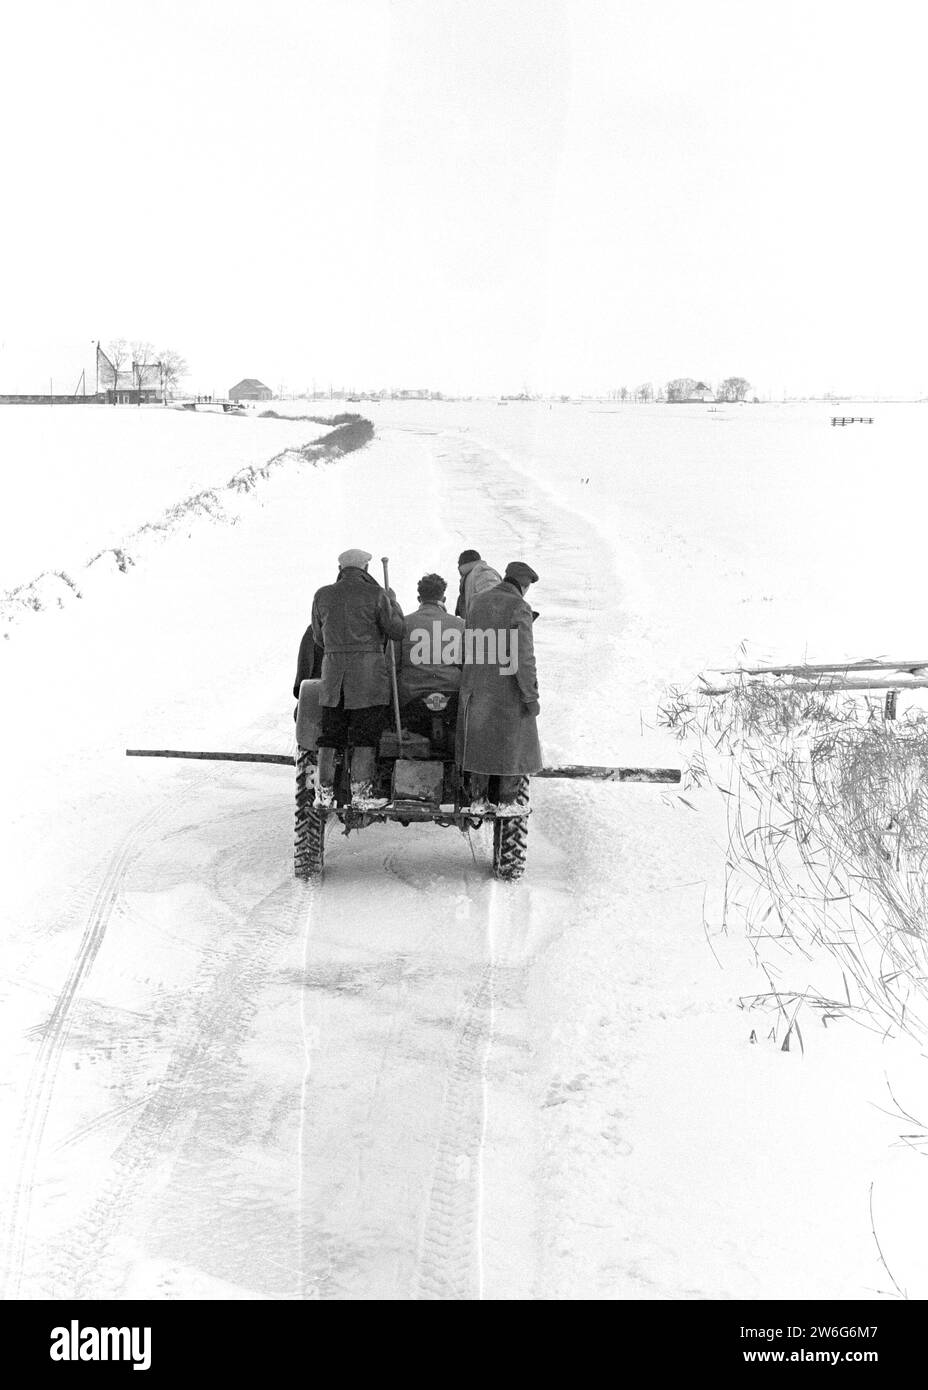 Friesland is preparing for the Elfstedentocht, between Berlikum and St. Annaparochie with an agricultural tractor on the ice ca. January 14, 1963 Stock Photo